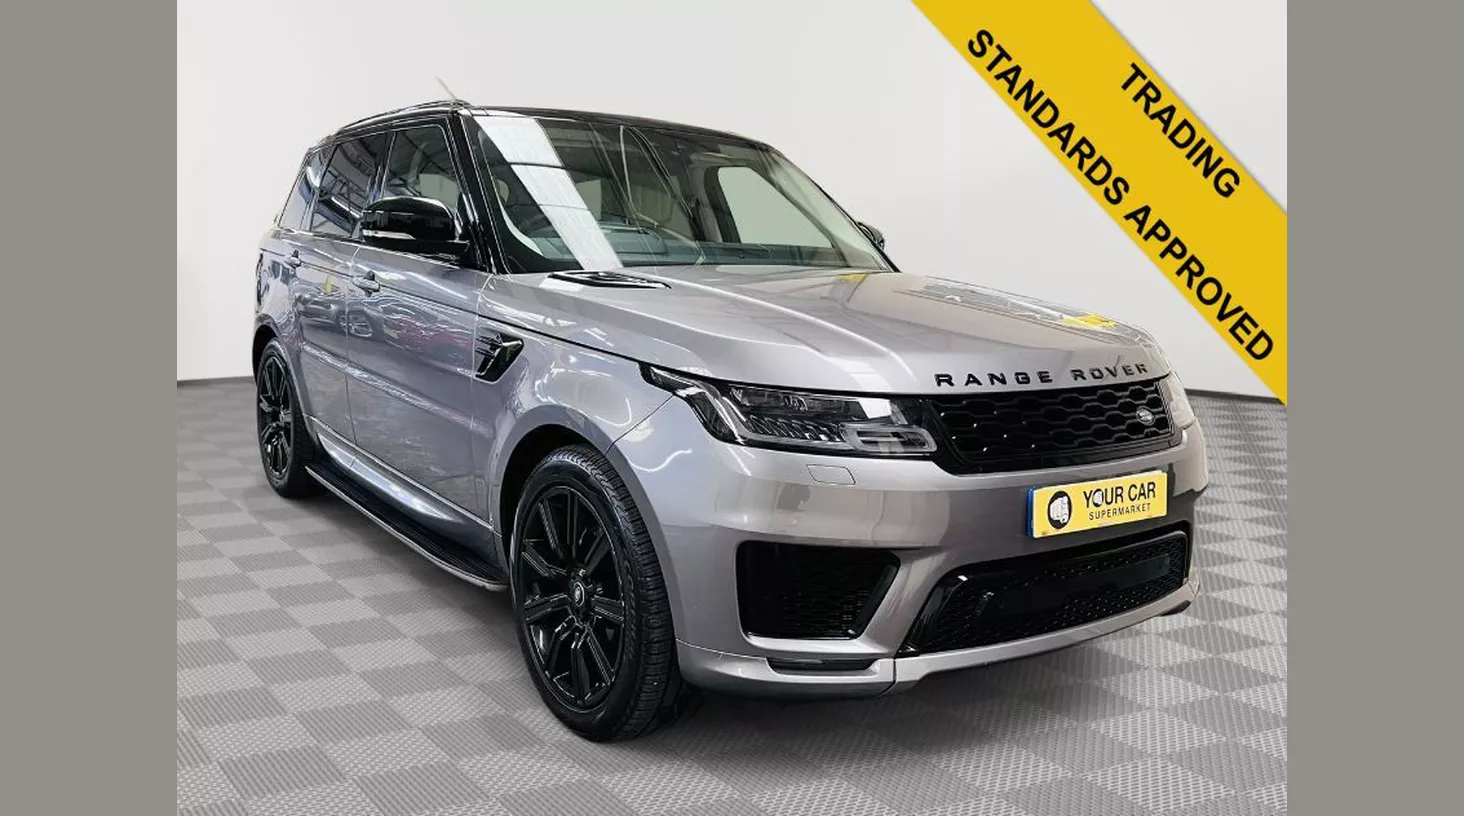 Land Rover Range Rover Sport 3.0 SDV6 HSE Dynamic 5dr Auto [7 Seat]